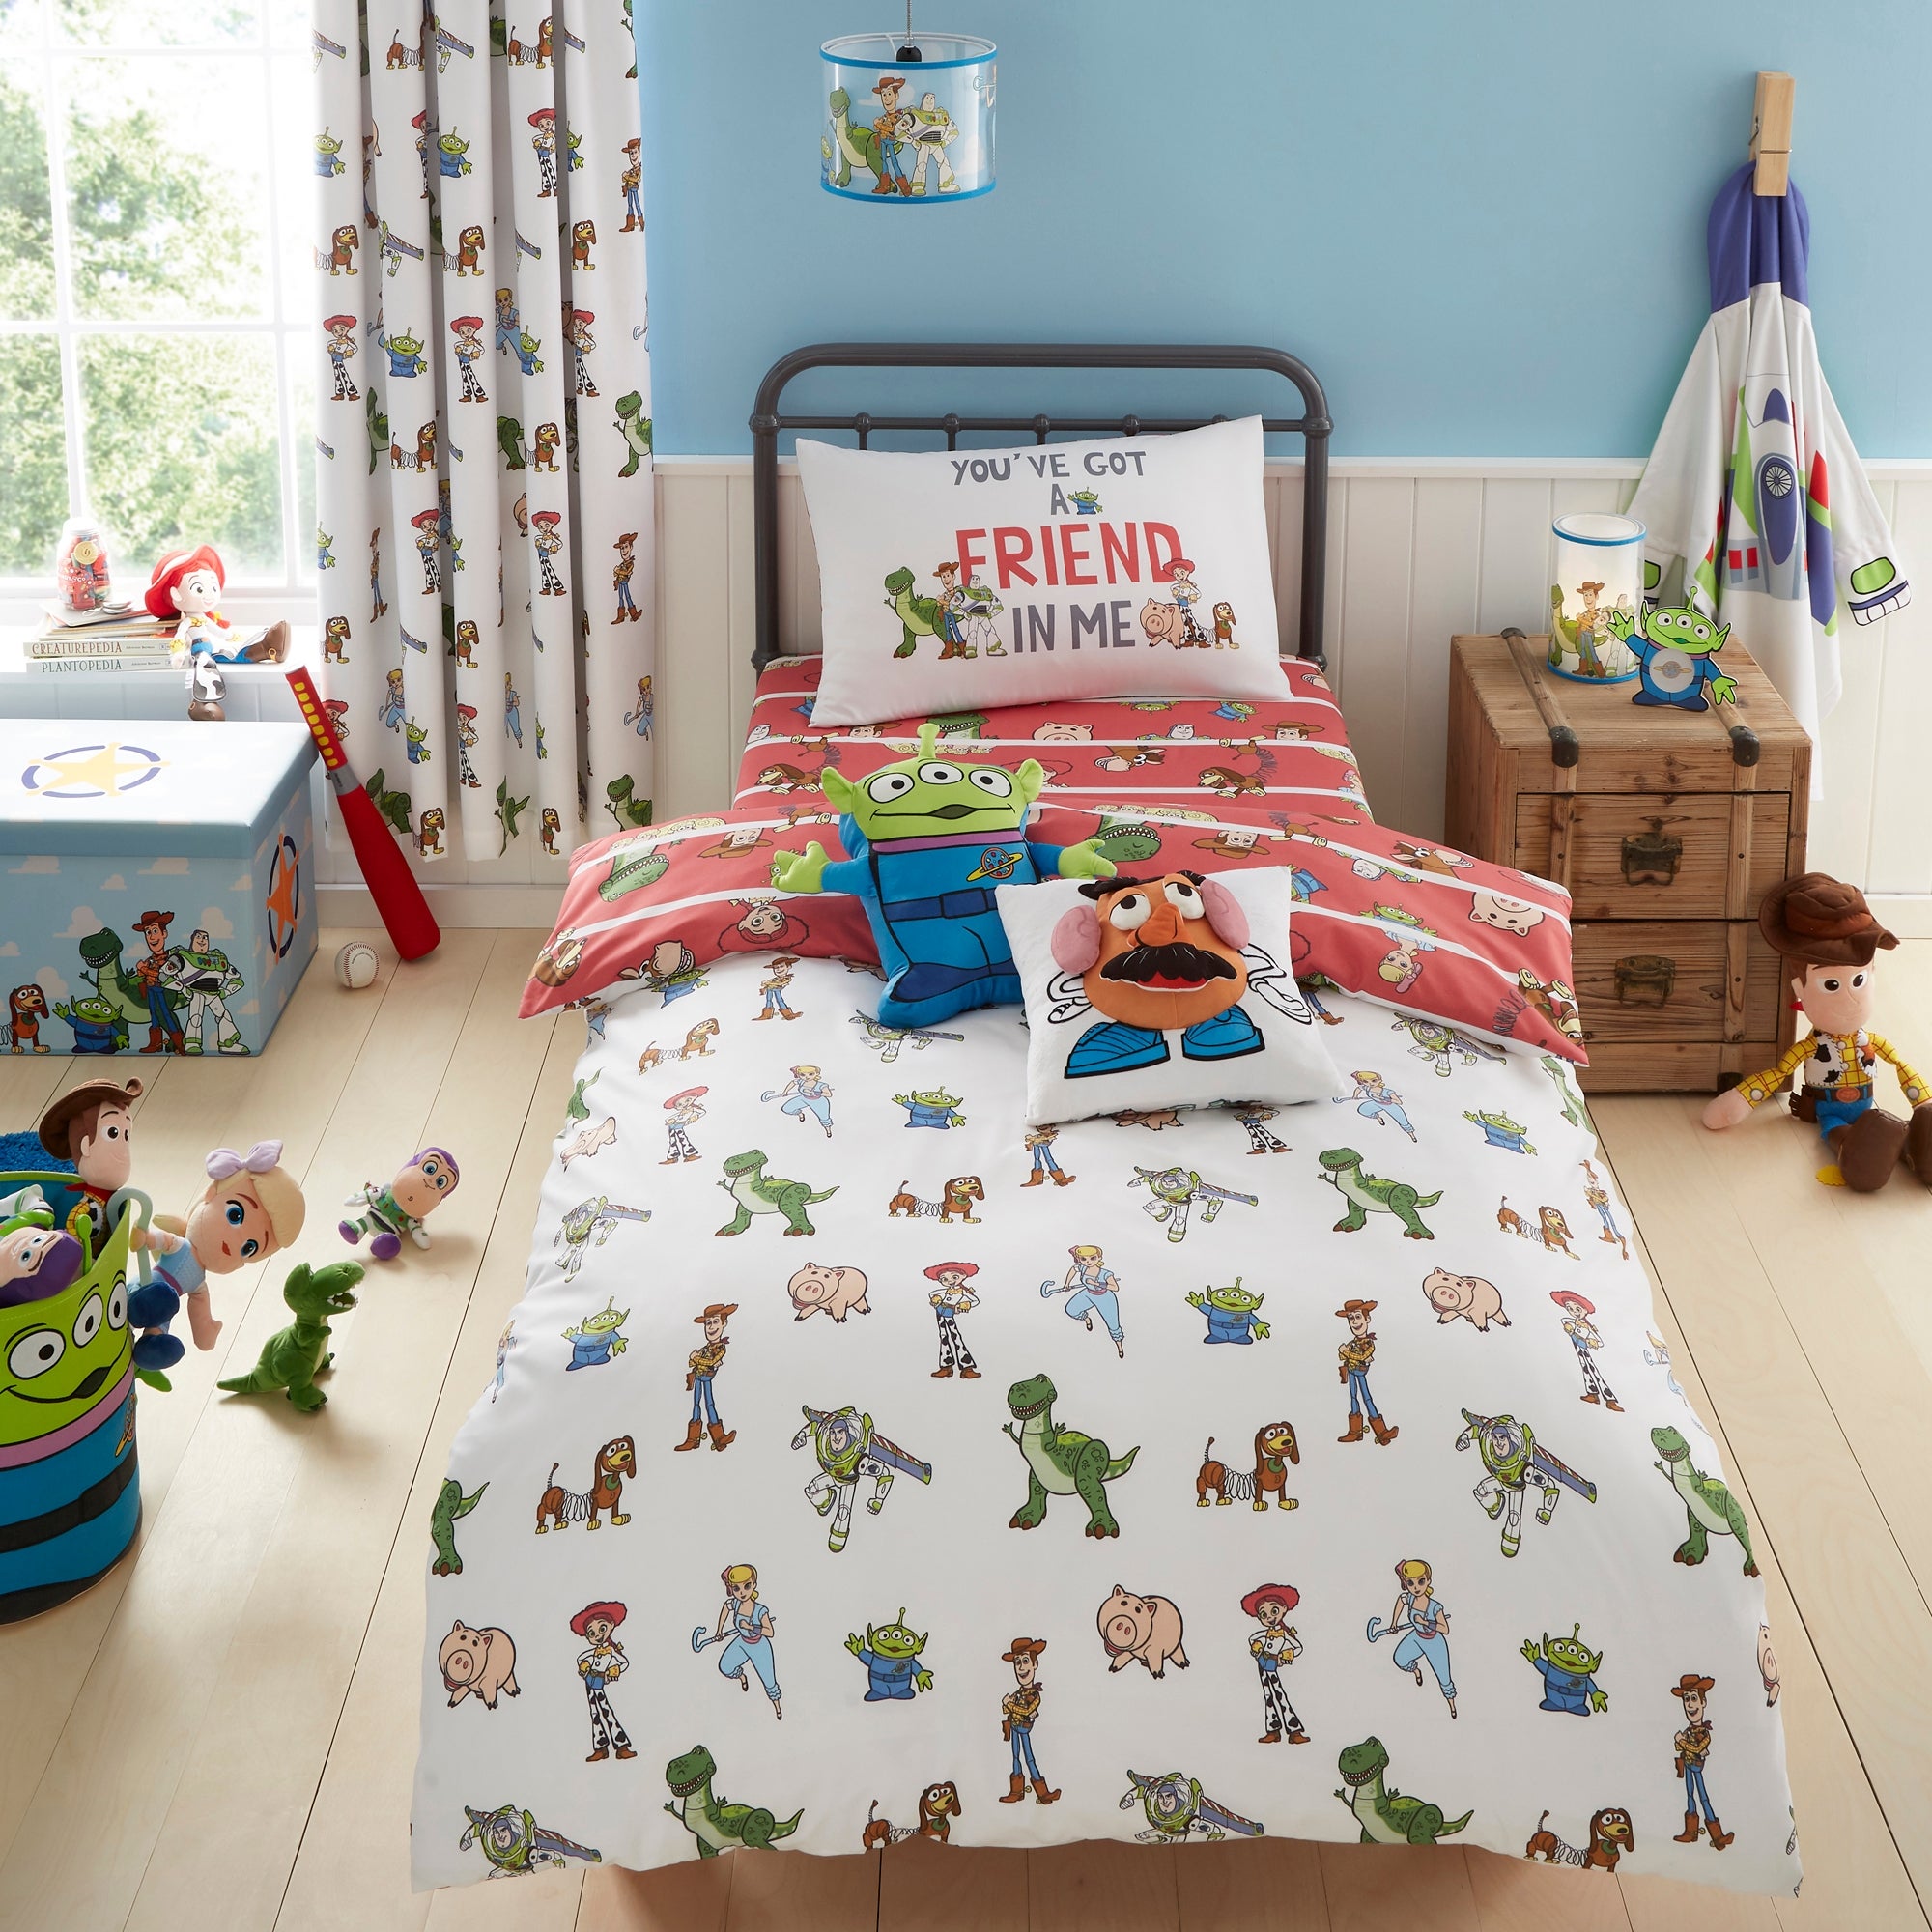 Disney Toy Story Duvet Cover And Pillowcase Set White Green And Brown